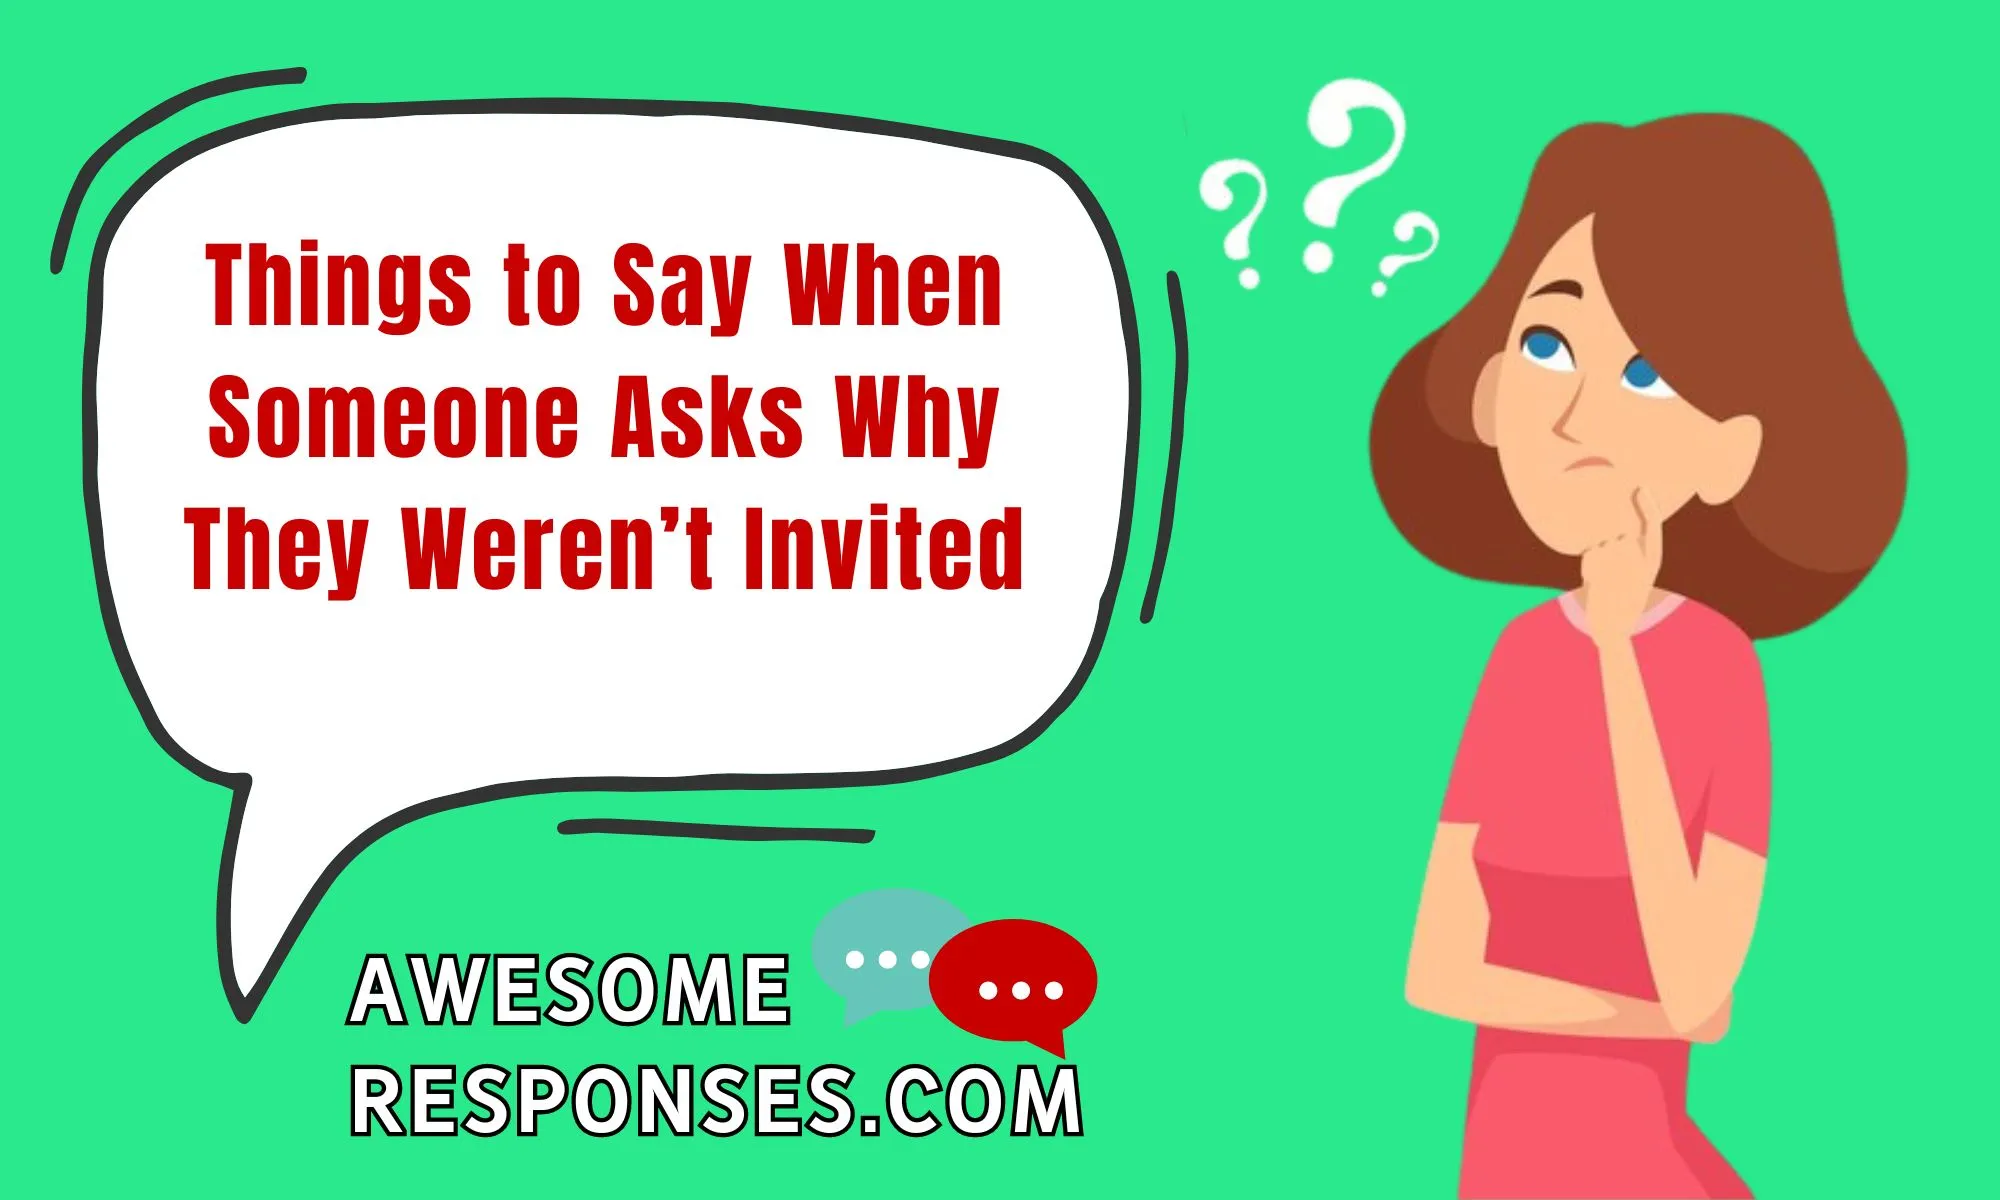 Things to Say When Someone Asks Why They Weren’t Invited